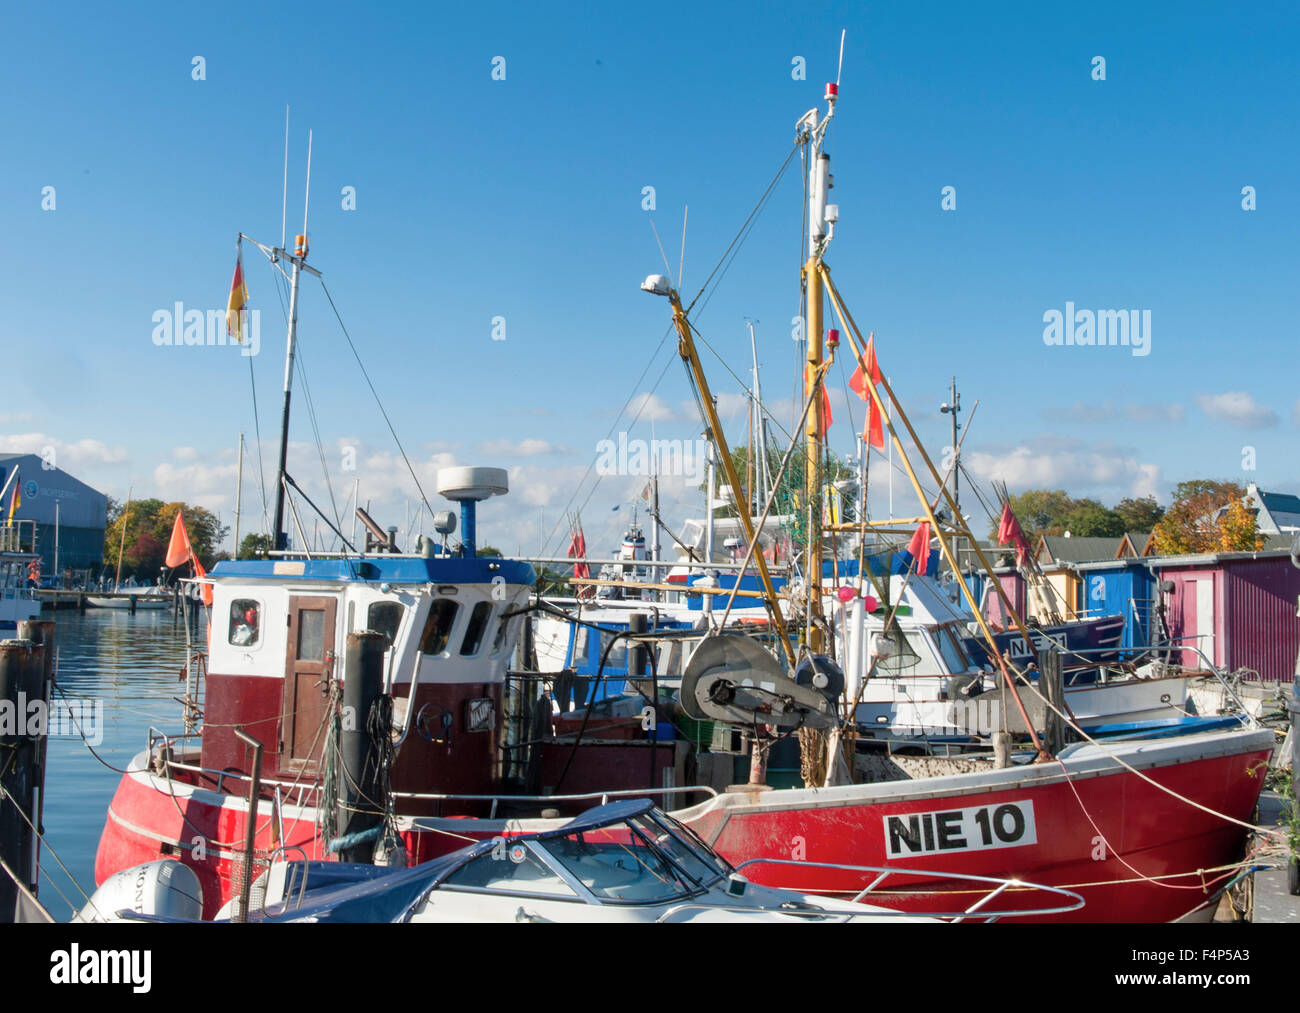 The traditional Baltic Sea fishing port of Niendorf/Ostsee, Schleswig-Holstein, Germany Stock Photo